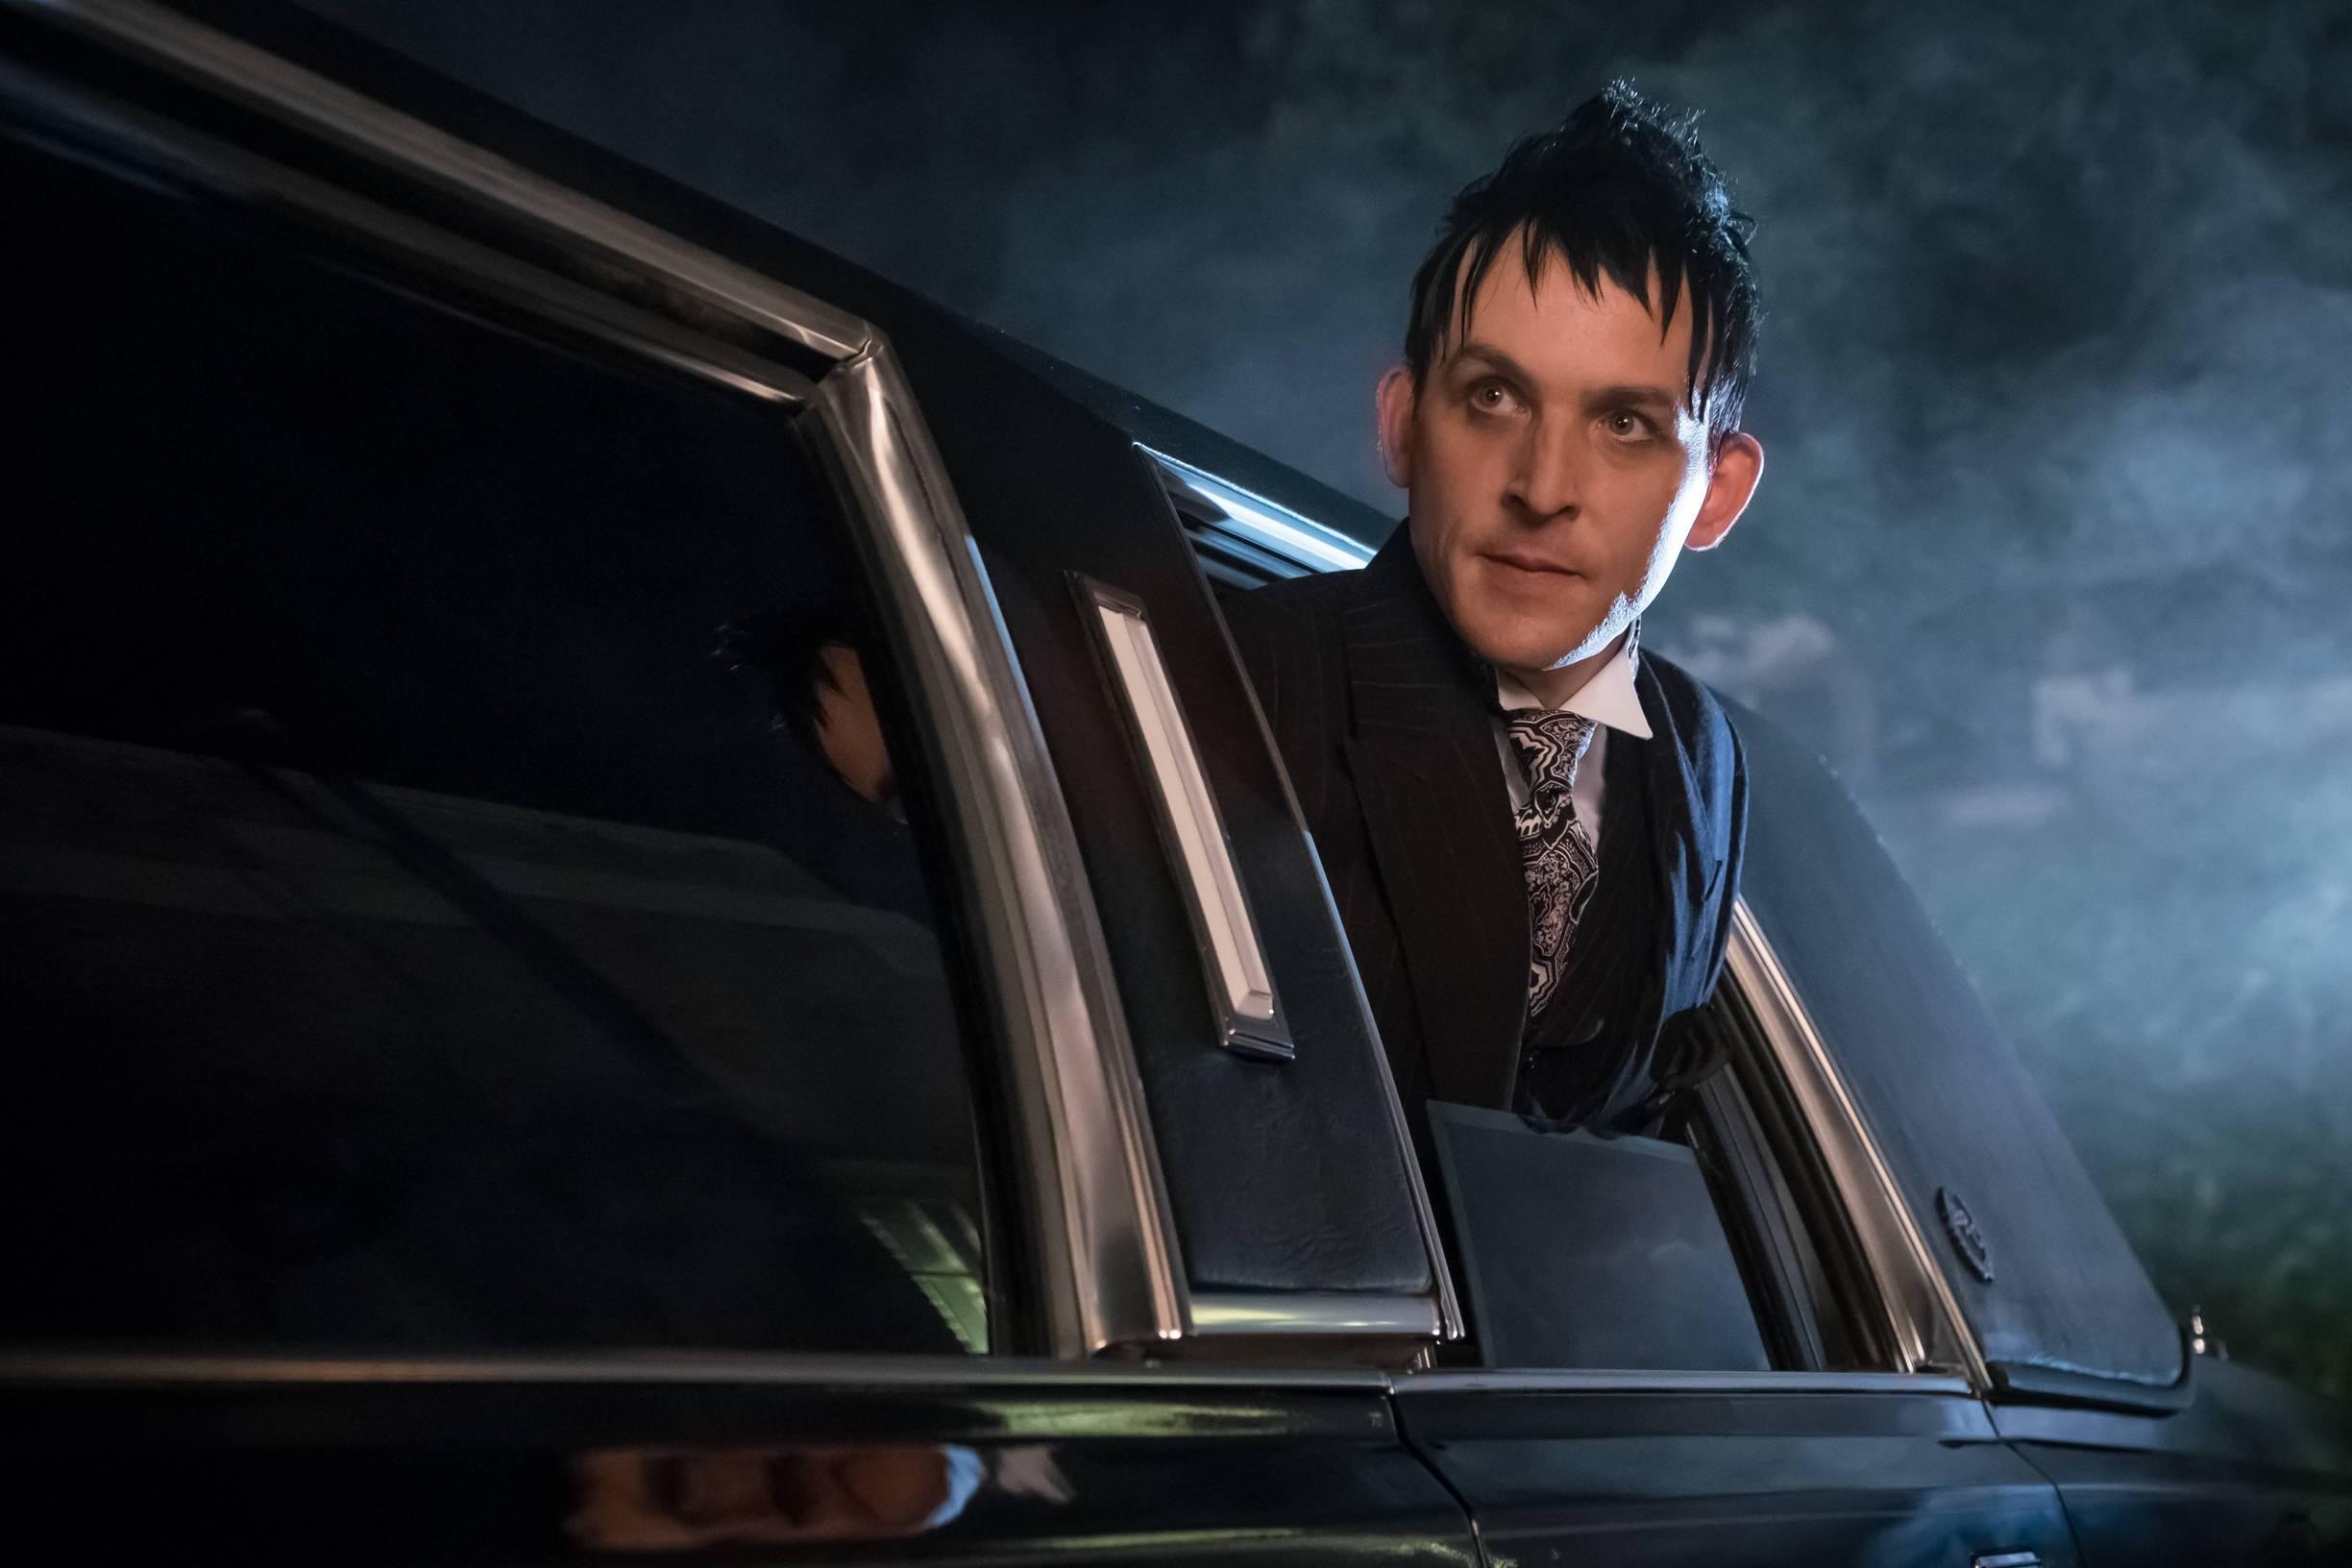 Penguin Is The Mayor Of 'Gotham' Now, But Ed Nygma Could End